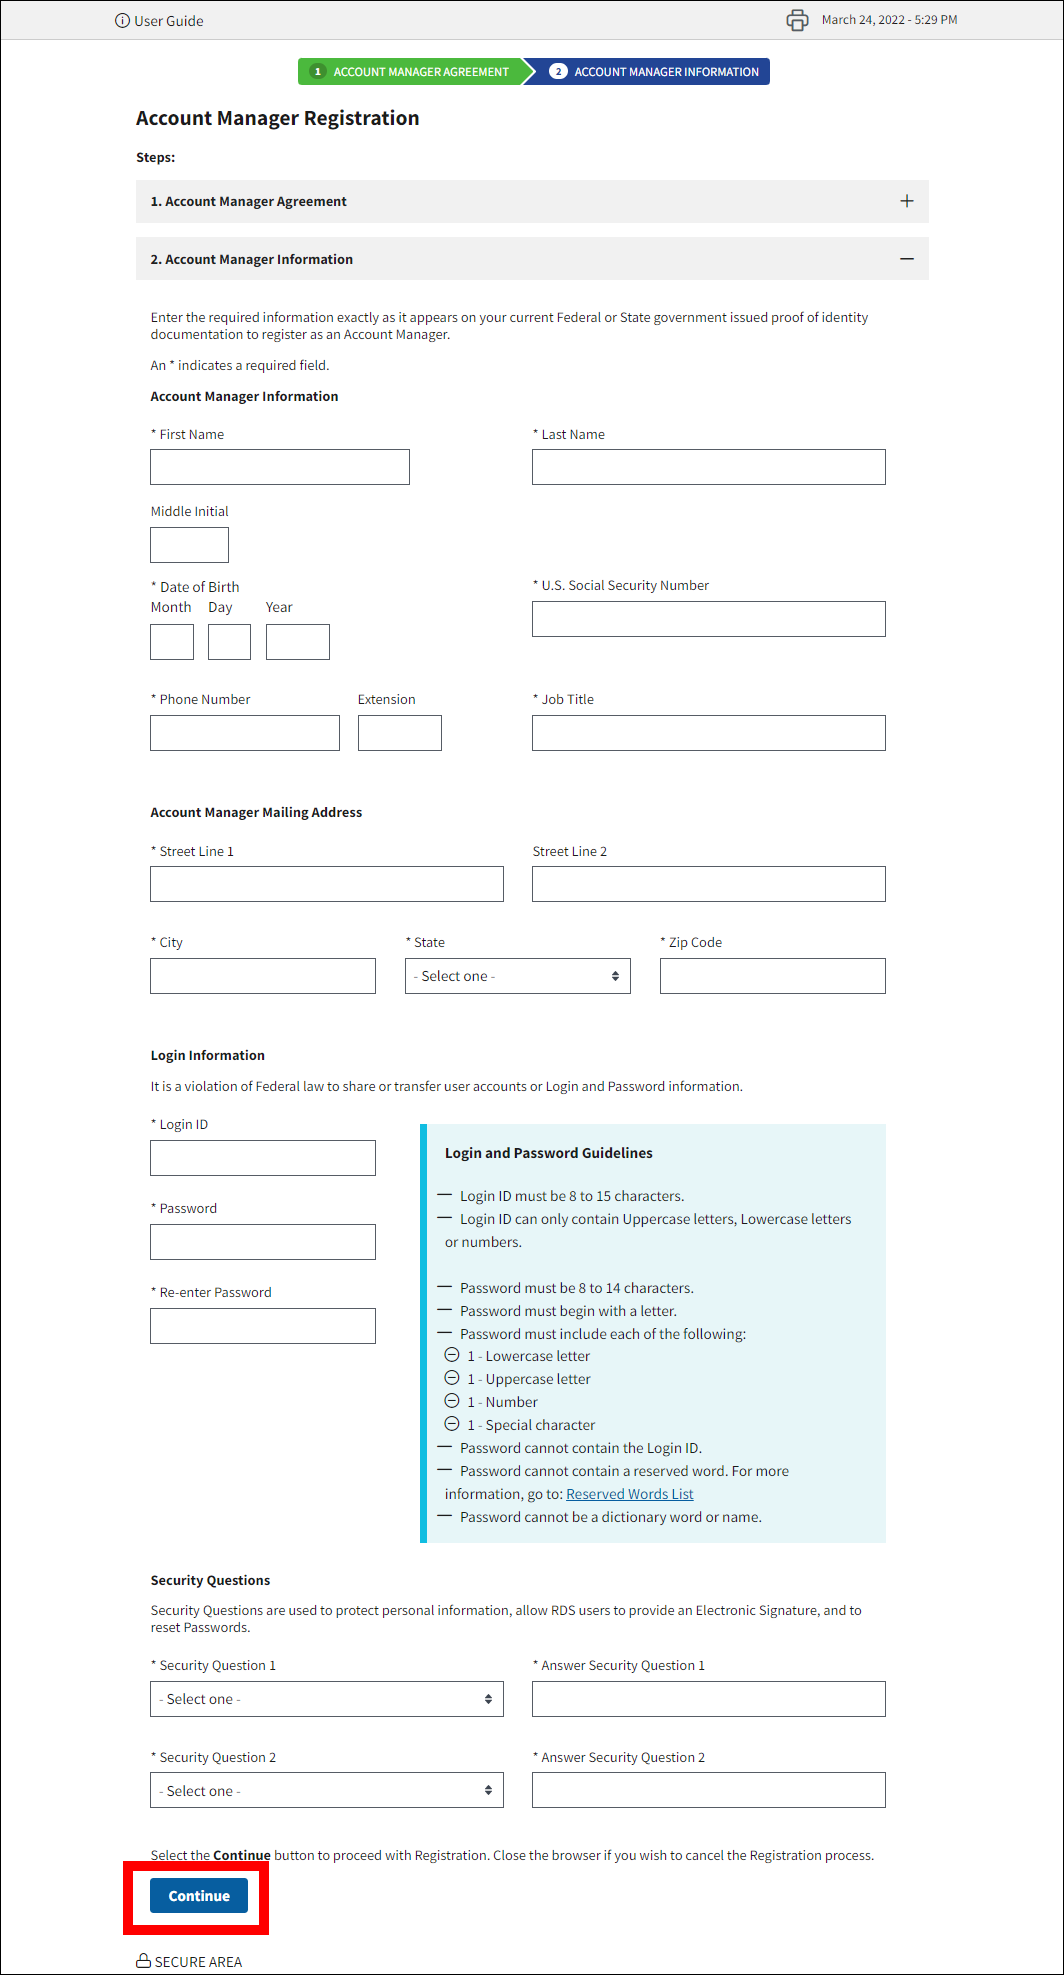 Account Manager Registration page with Continue button highlighted.